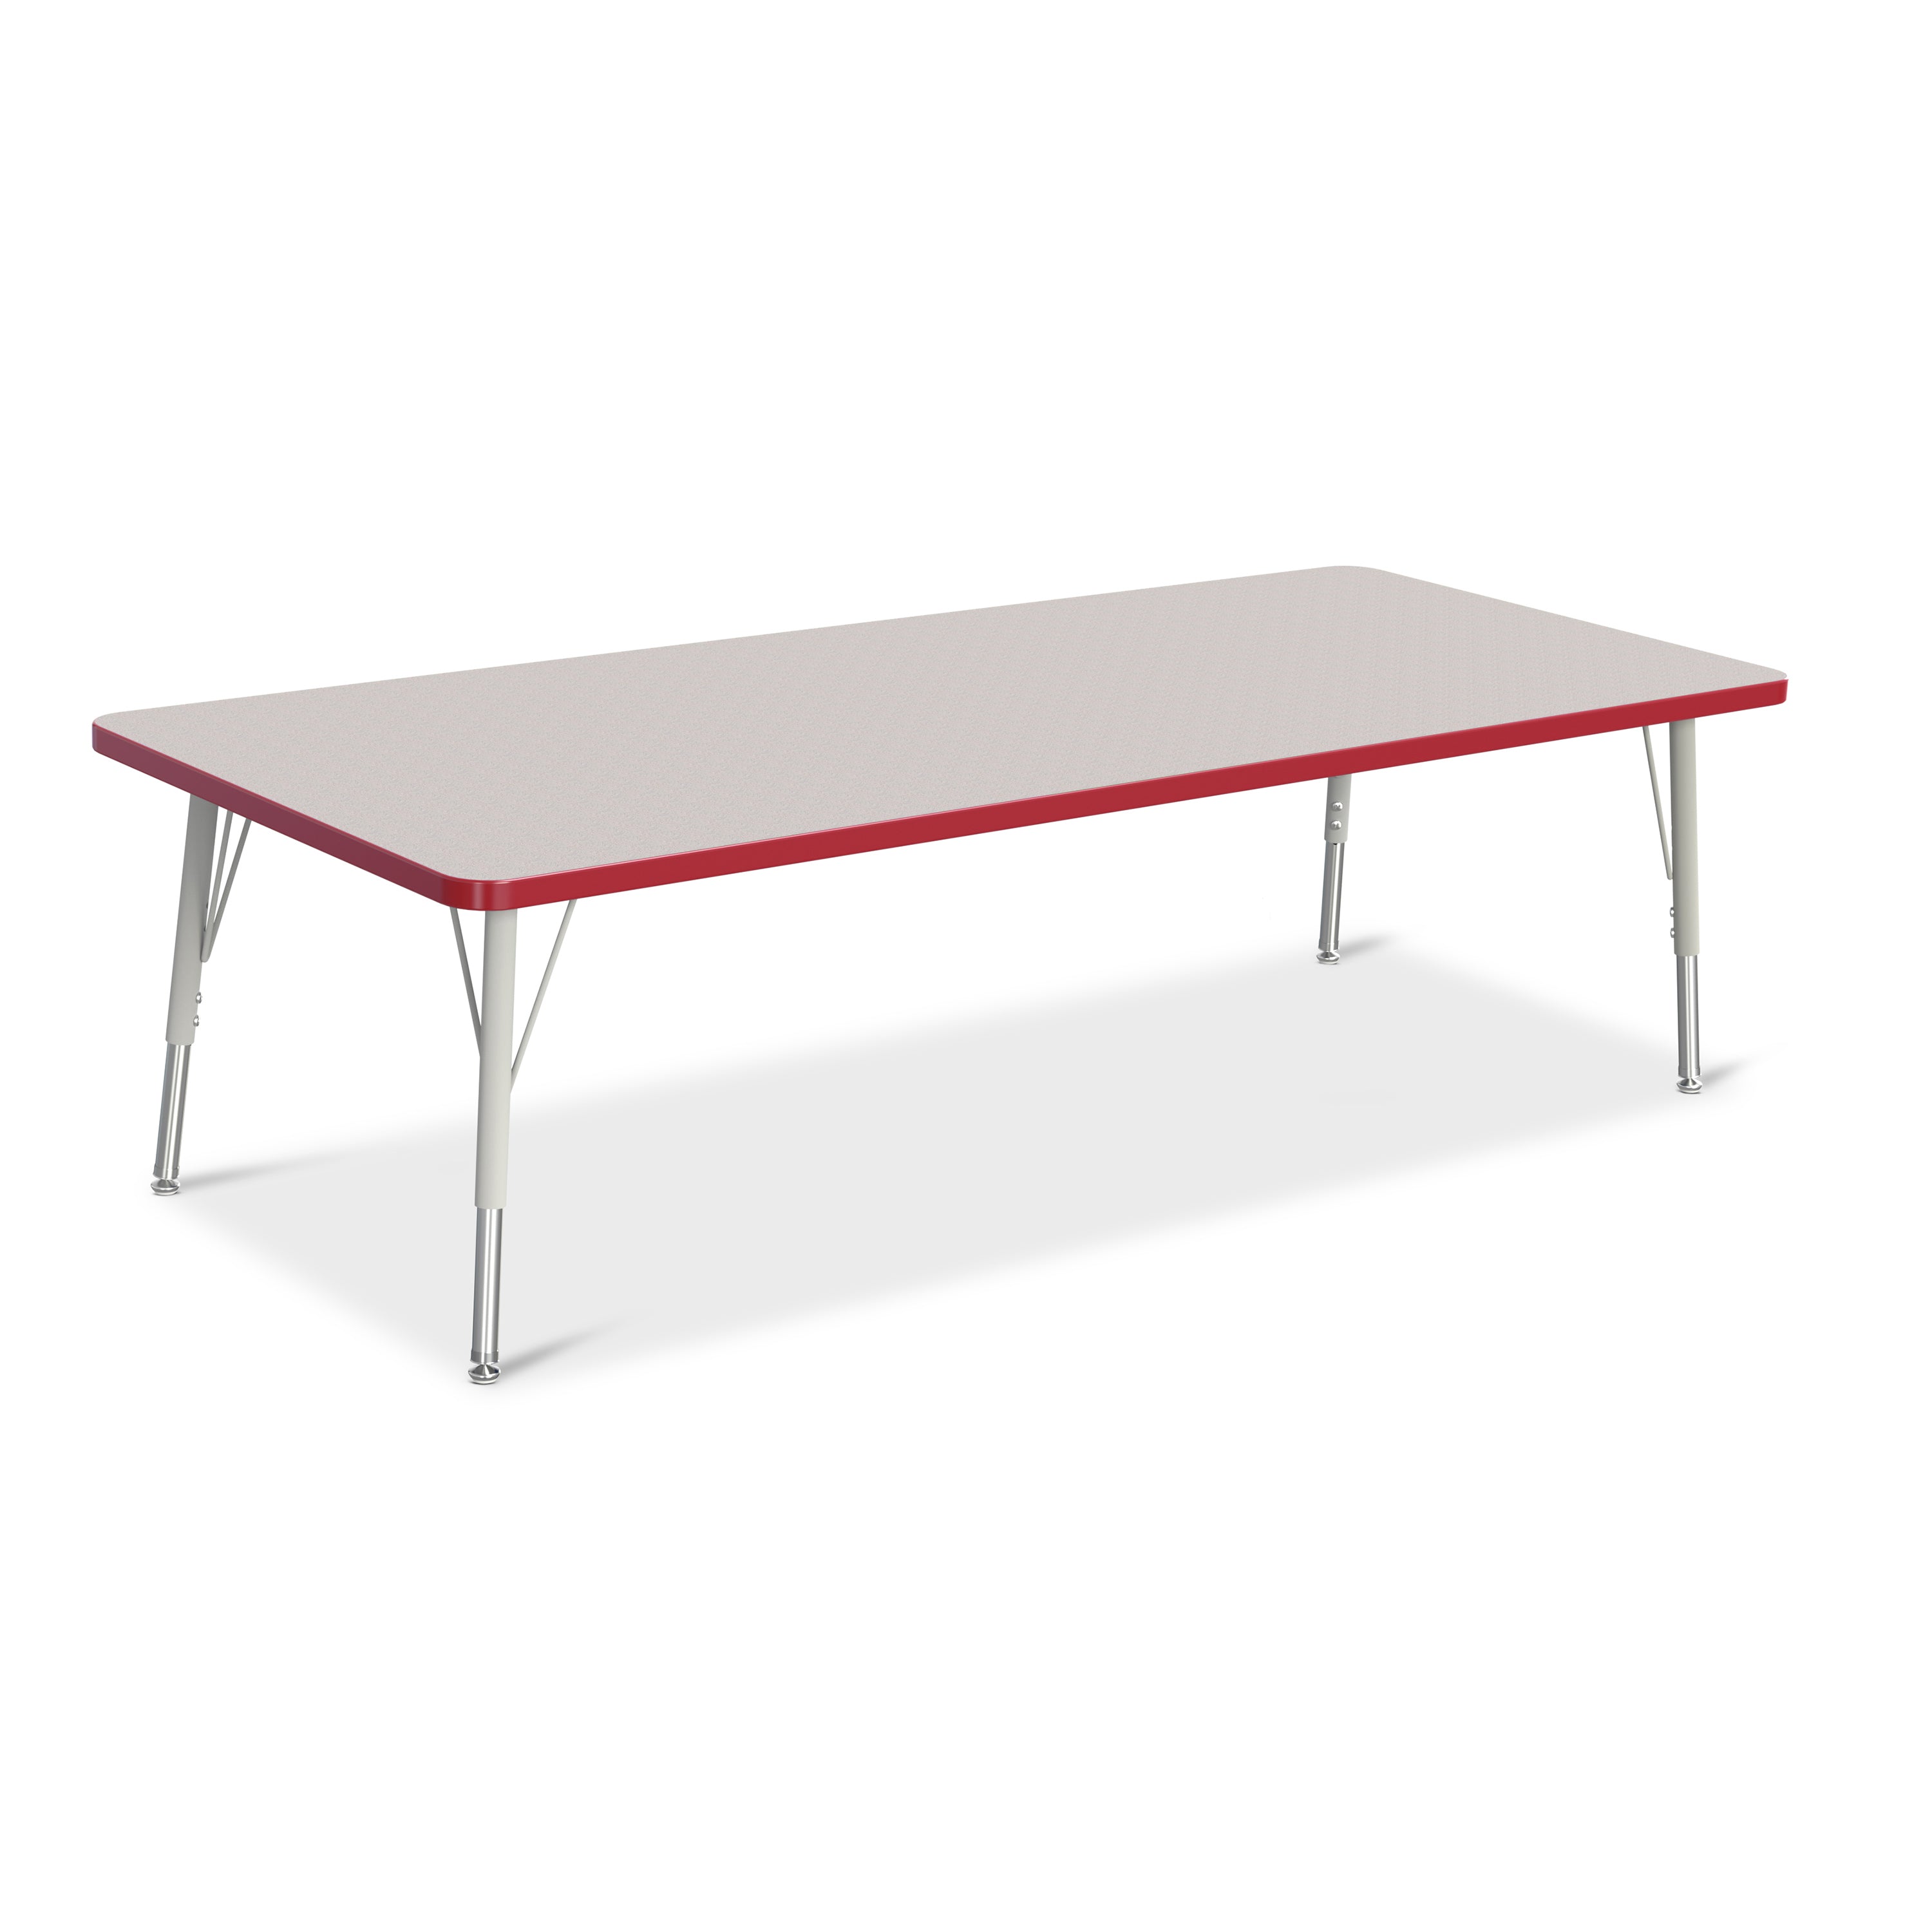 6413JCE008, Berries Rectangle Activity Table - 30" X 72", E-height - Freckled Gray/Red/Gray